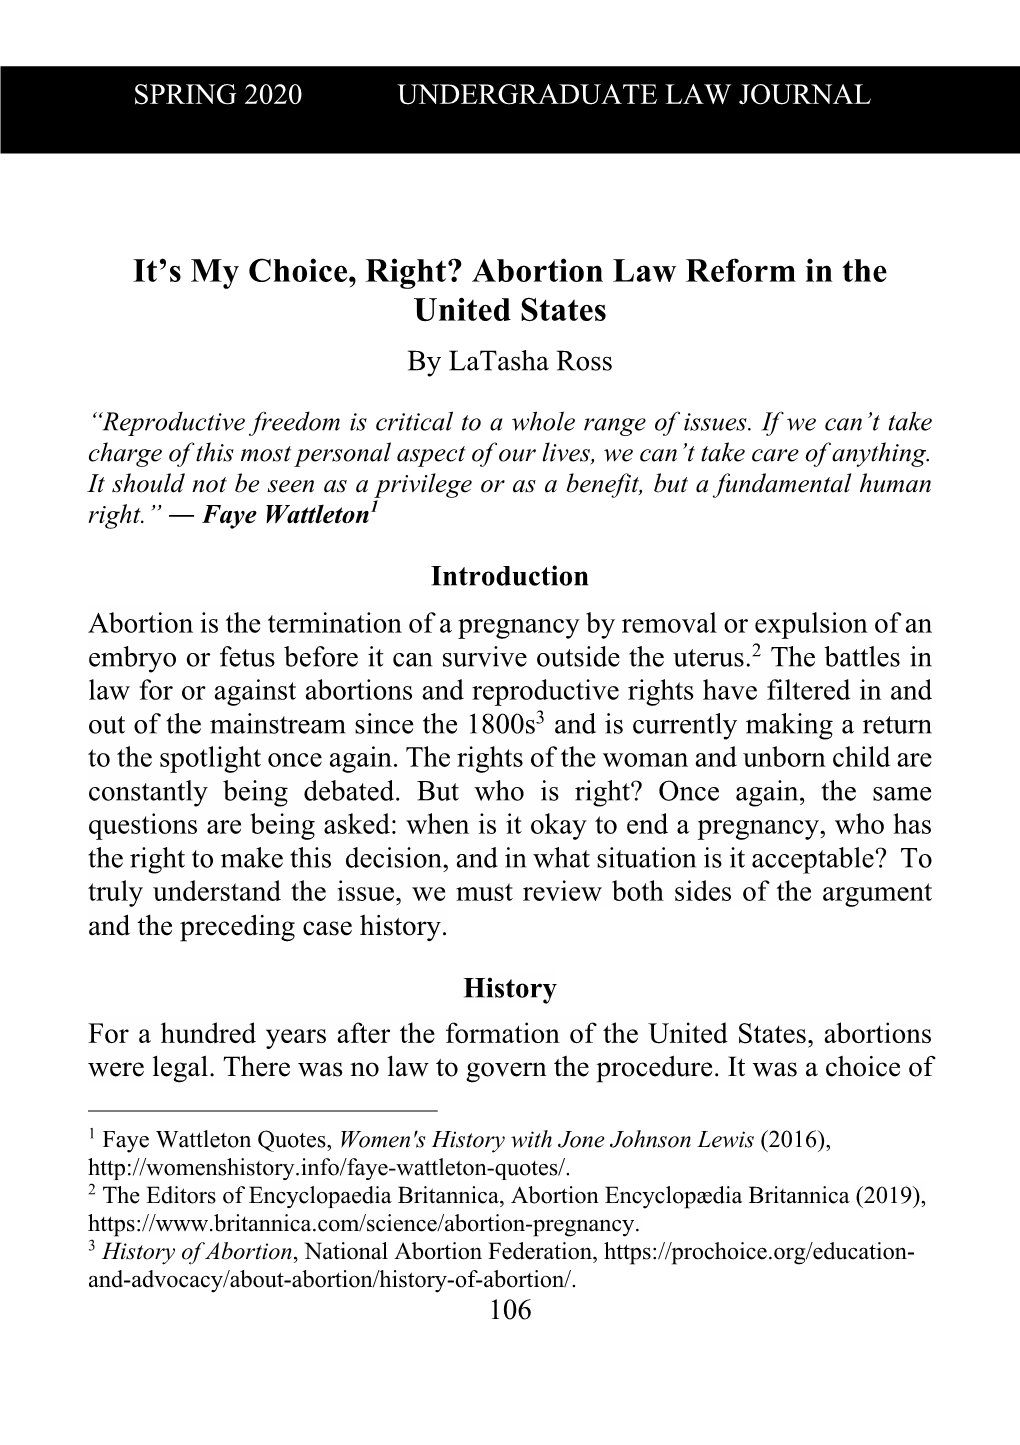 Abortion Law Reform in the United States by Latasha Ross